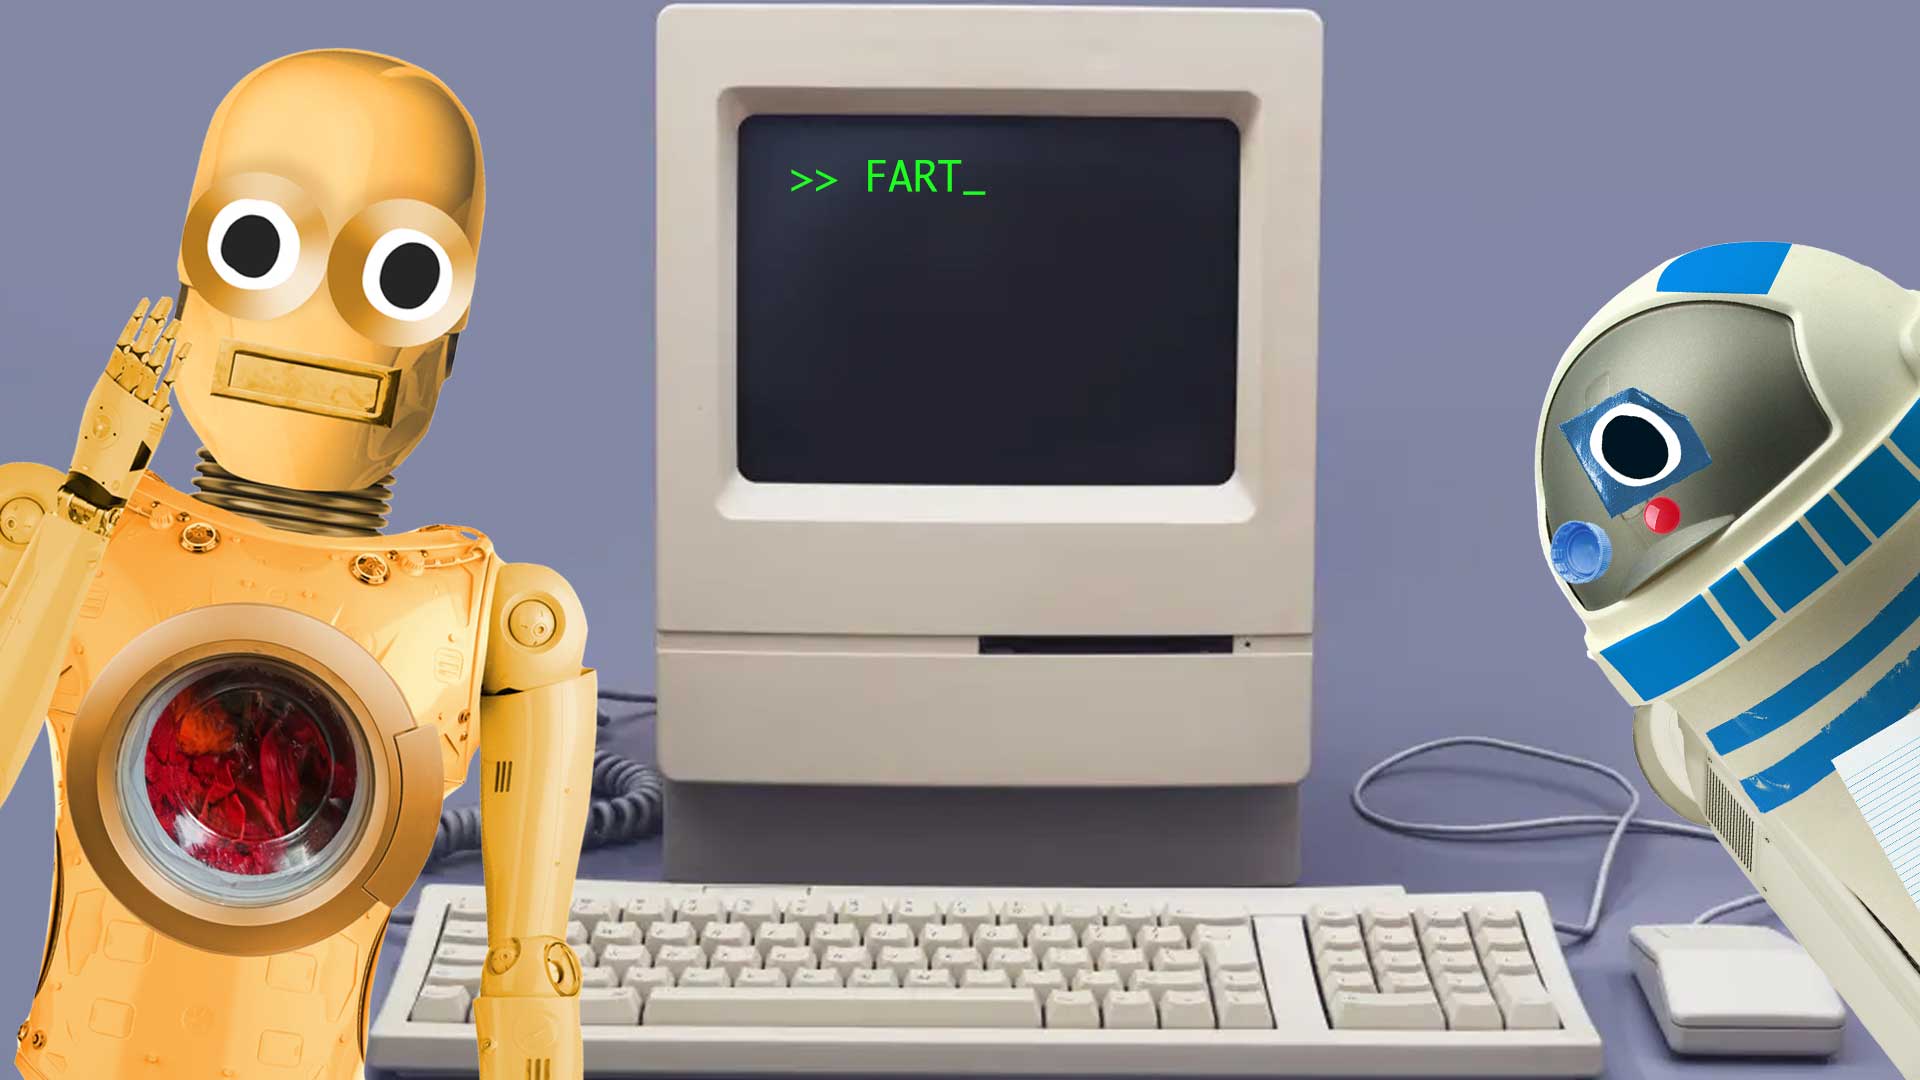 Space film characters surround an old computer